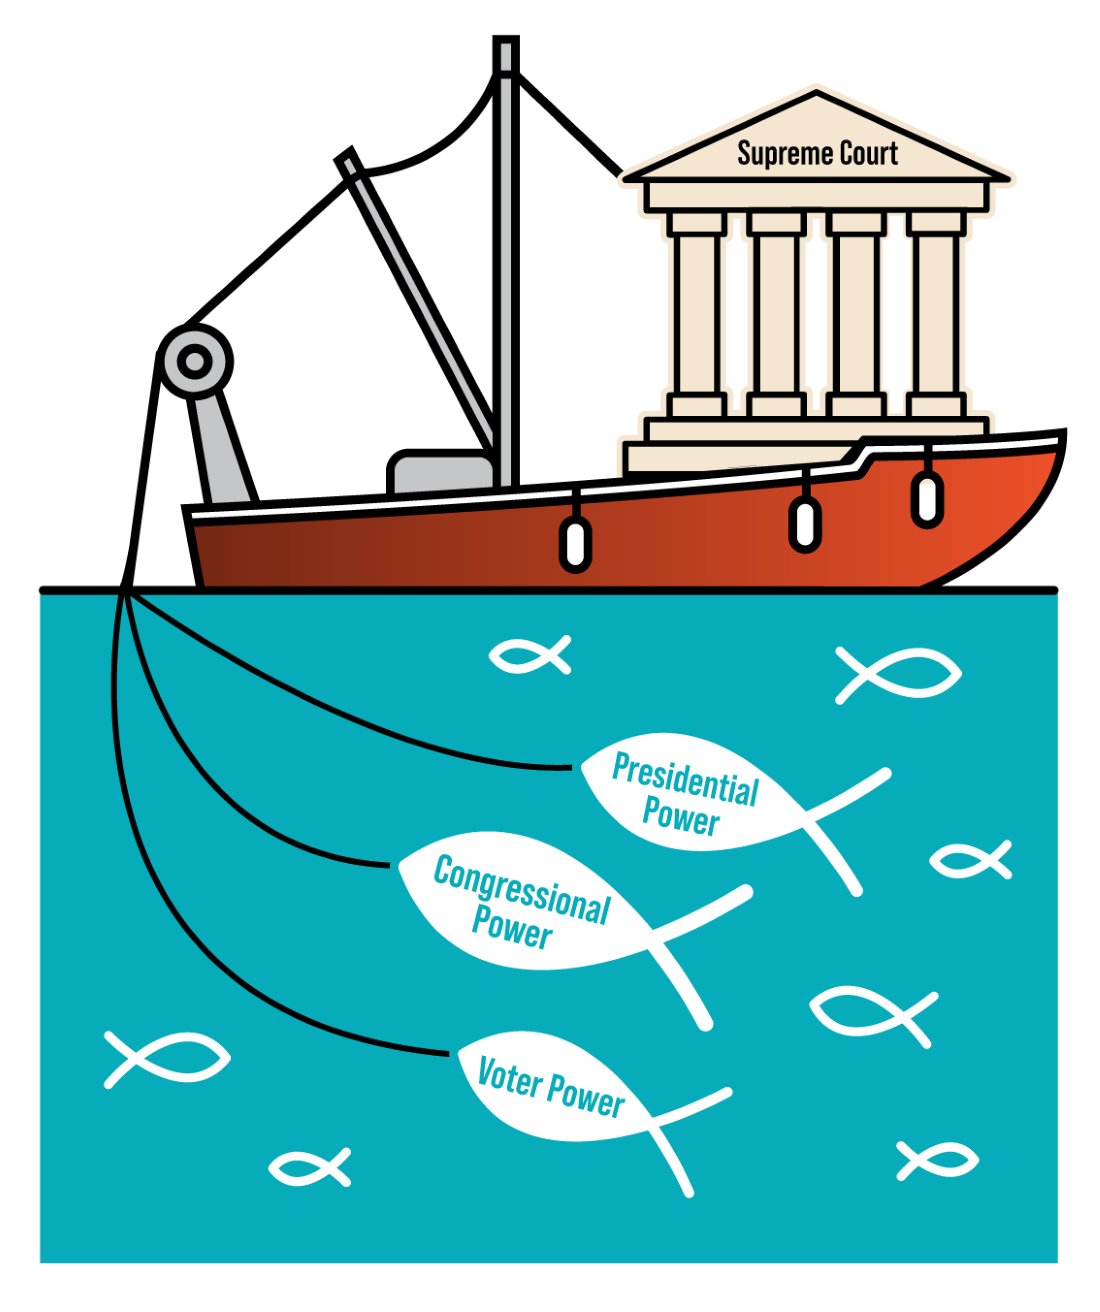 Illustration showing the Supreme Court building on a fishing boat, reeling in fish representing the power of the President, Congress, and voters.